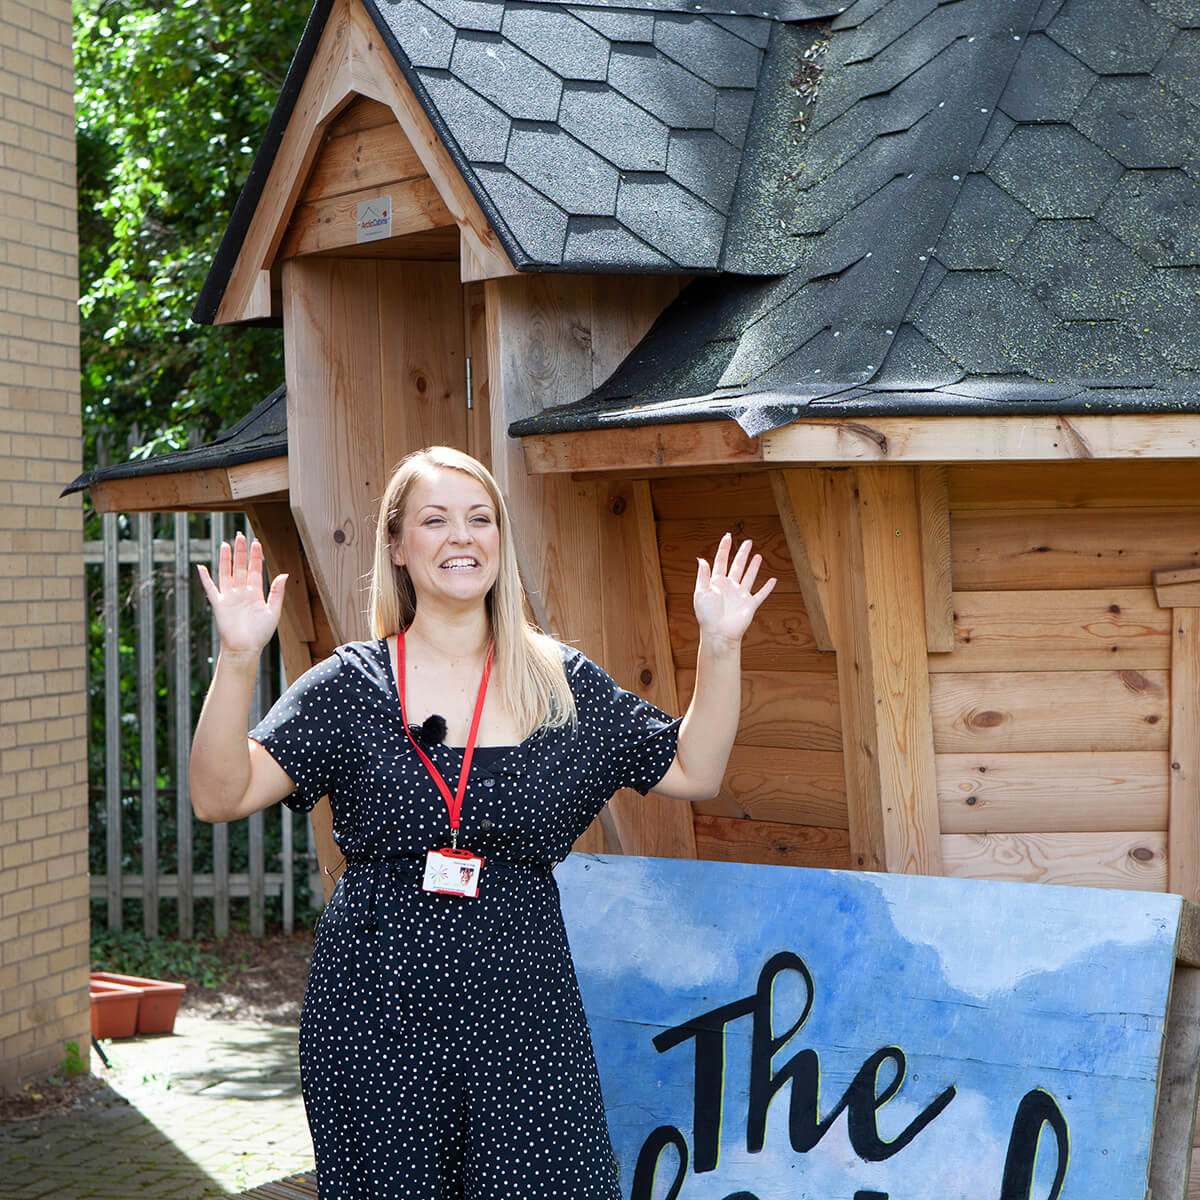 Teacher excited to be outside her new unique, quirky school hut